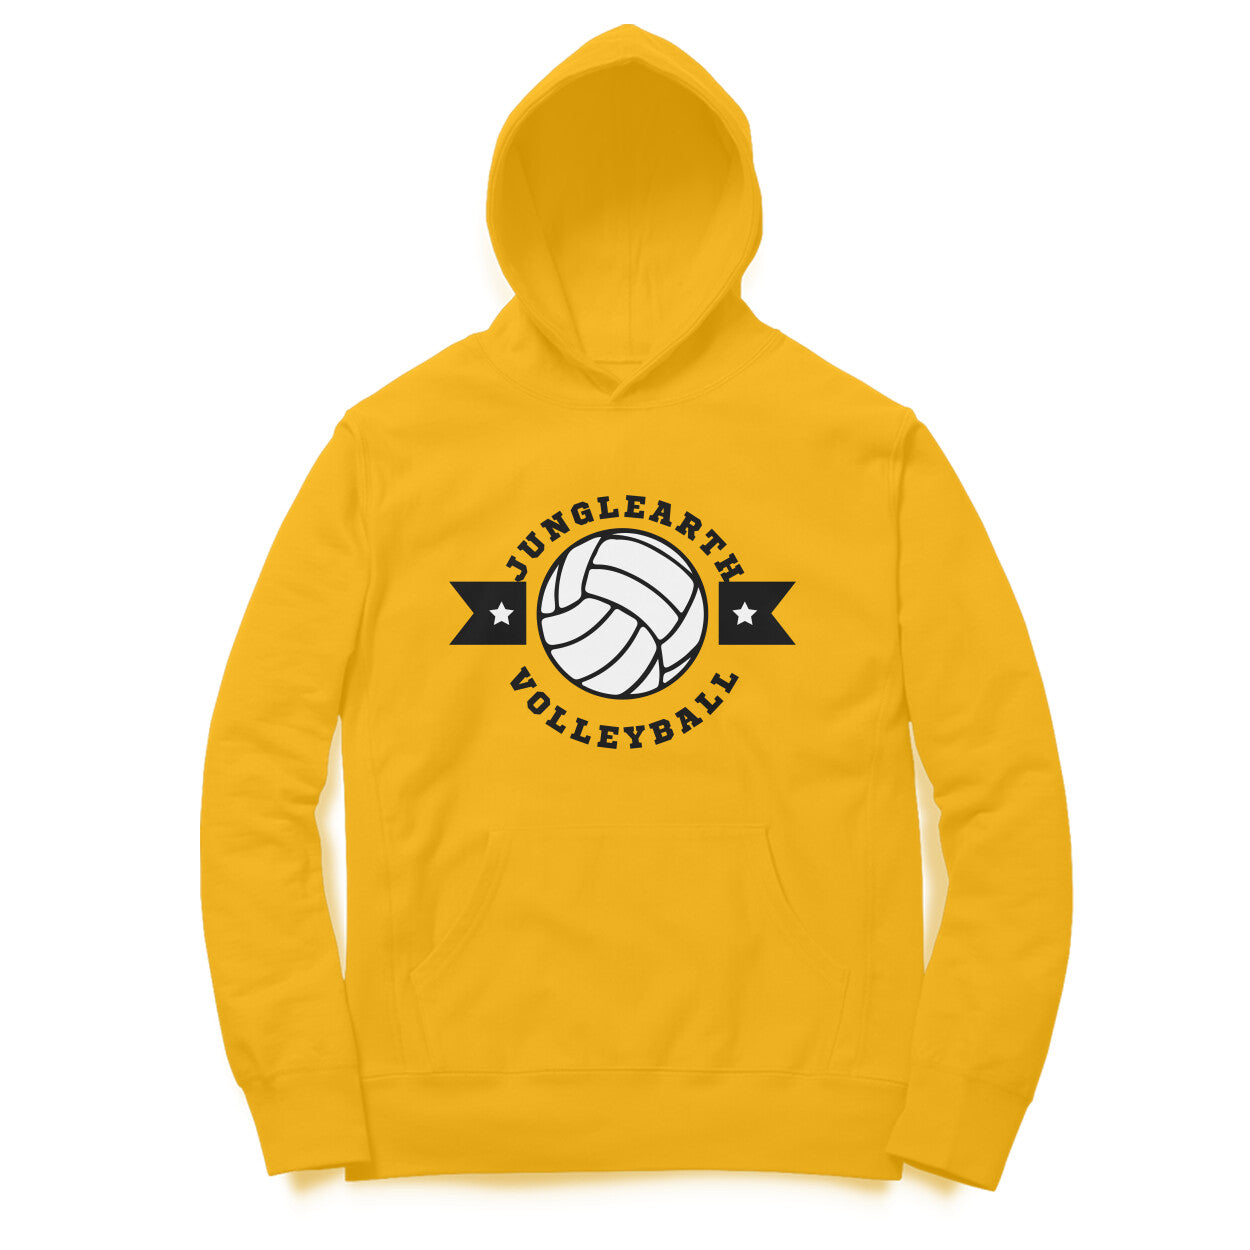 Junglearth Volleyball hoodie